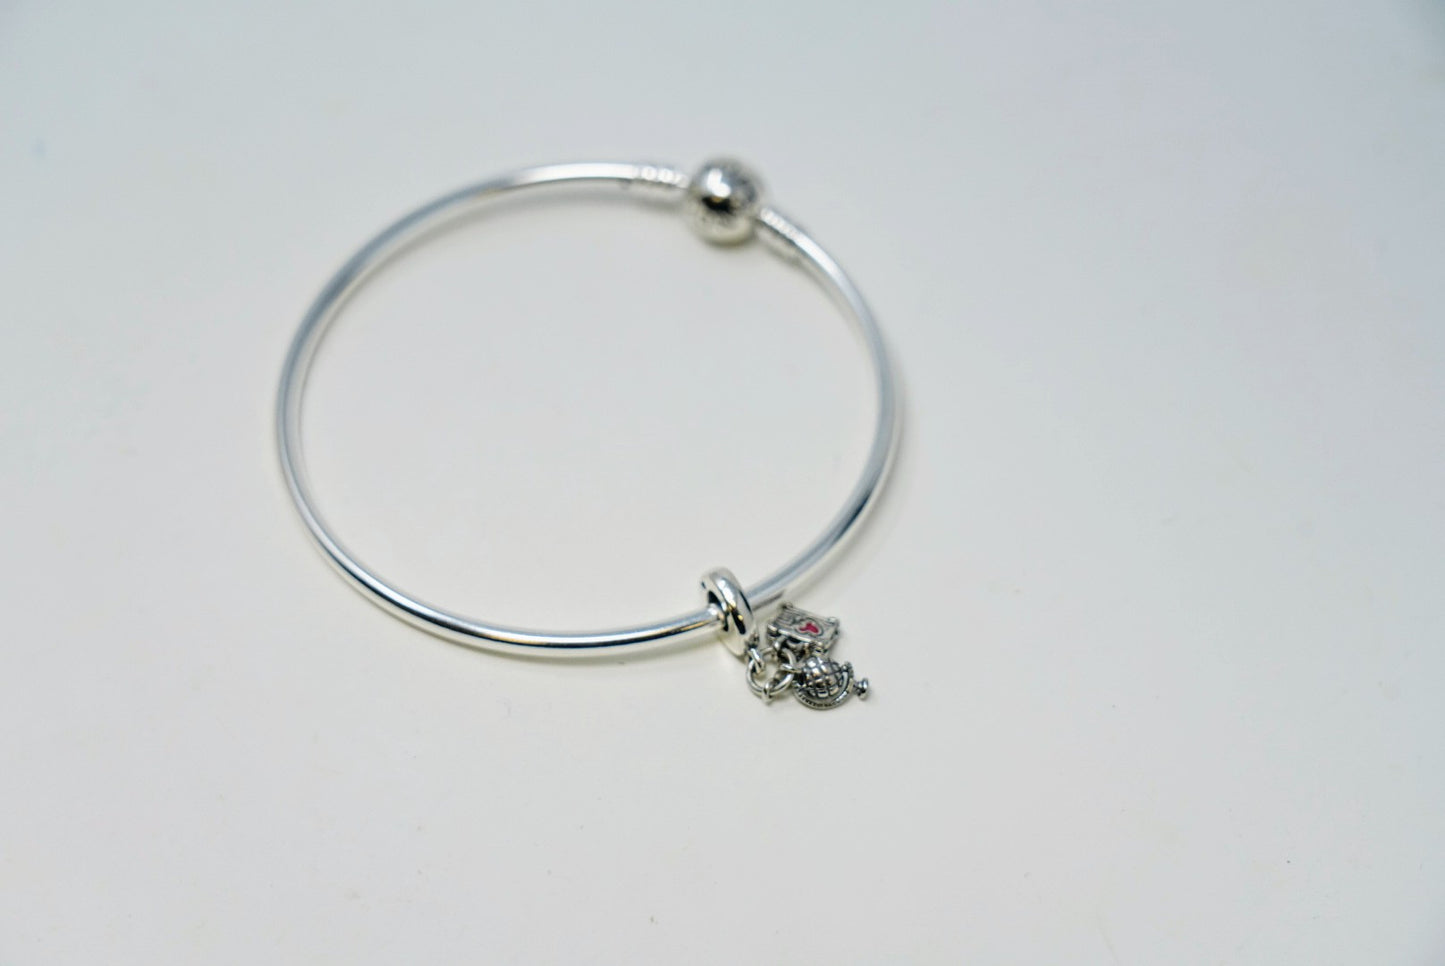 Sterling Silver Bracelet With Charm